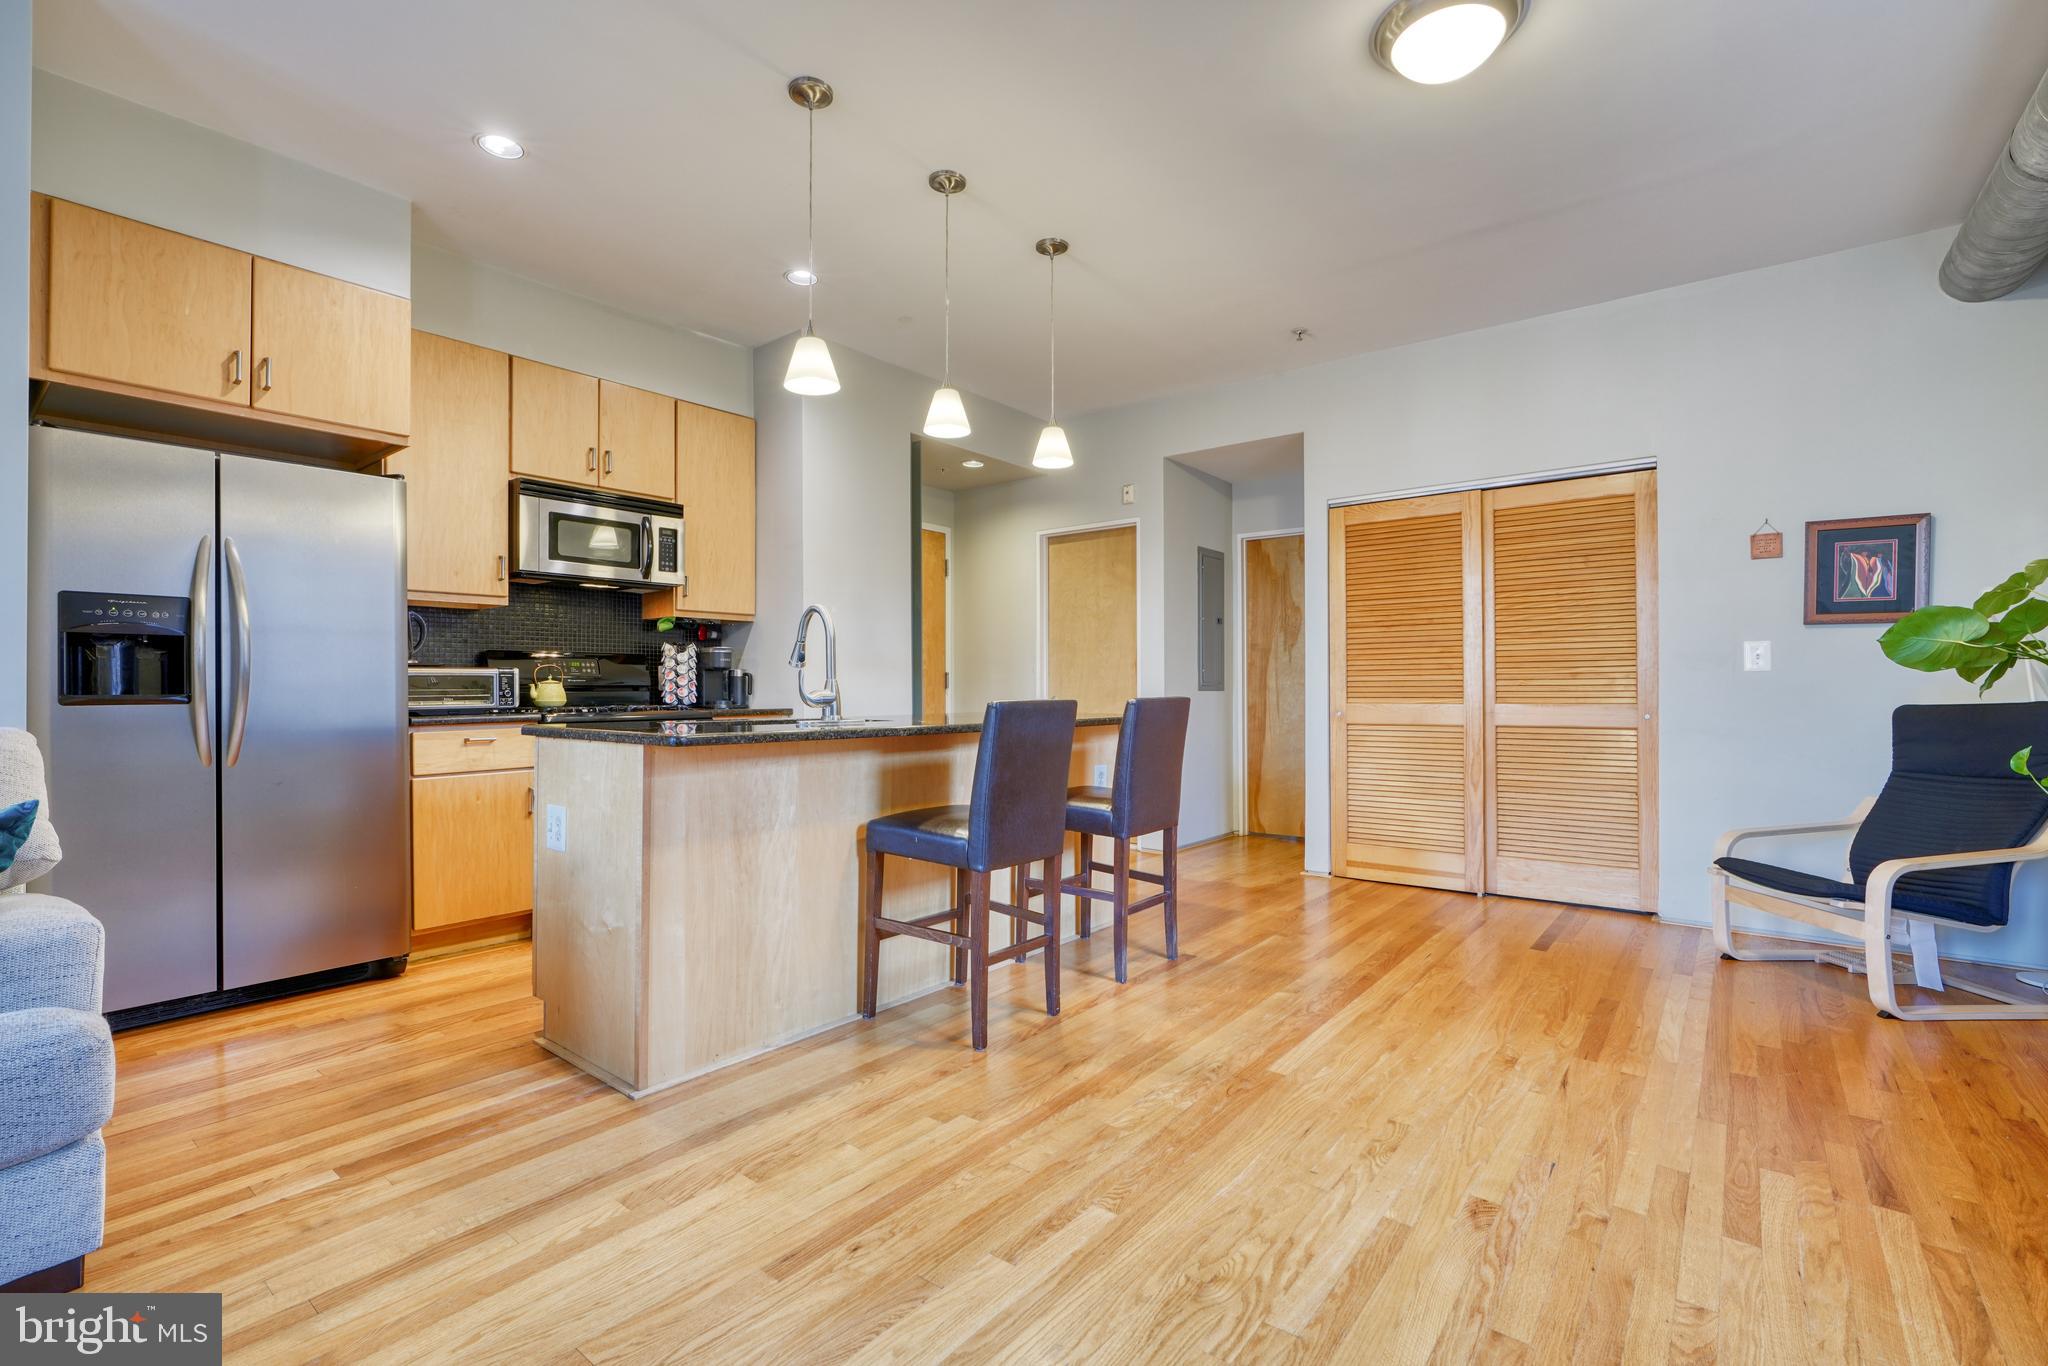 a kitchen with stainless steel appliances a dining table chairs stove refrigerator and cabinets